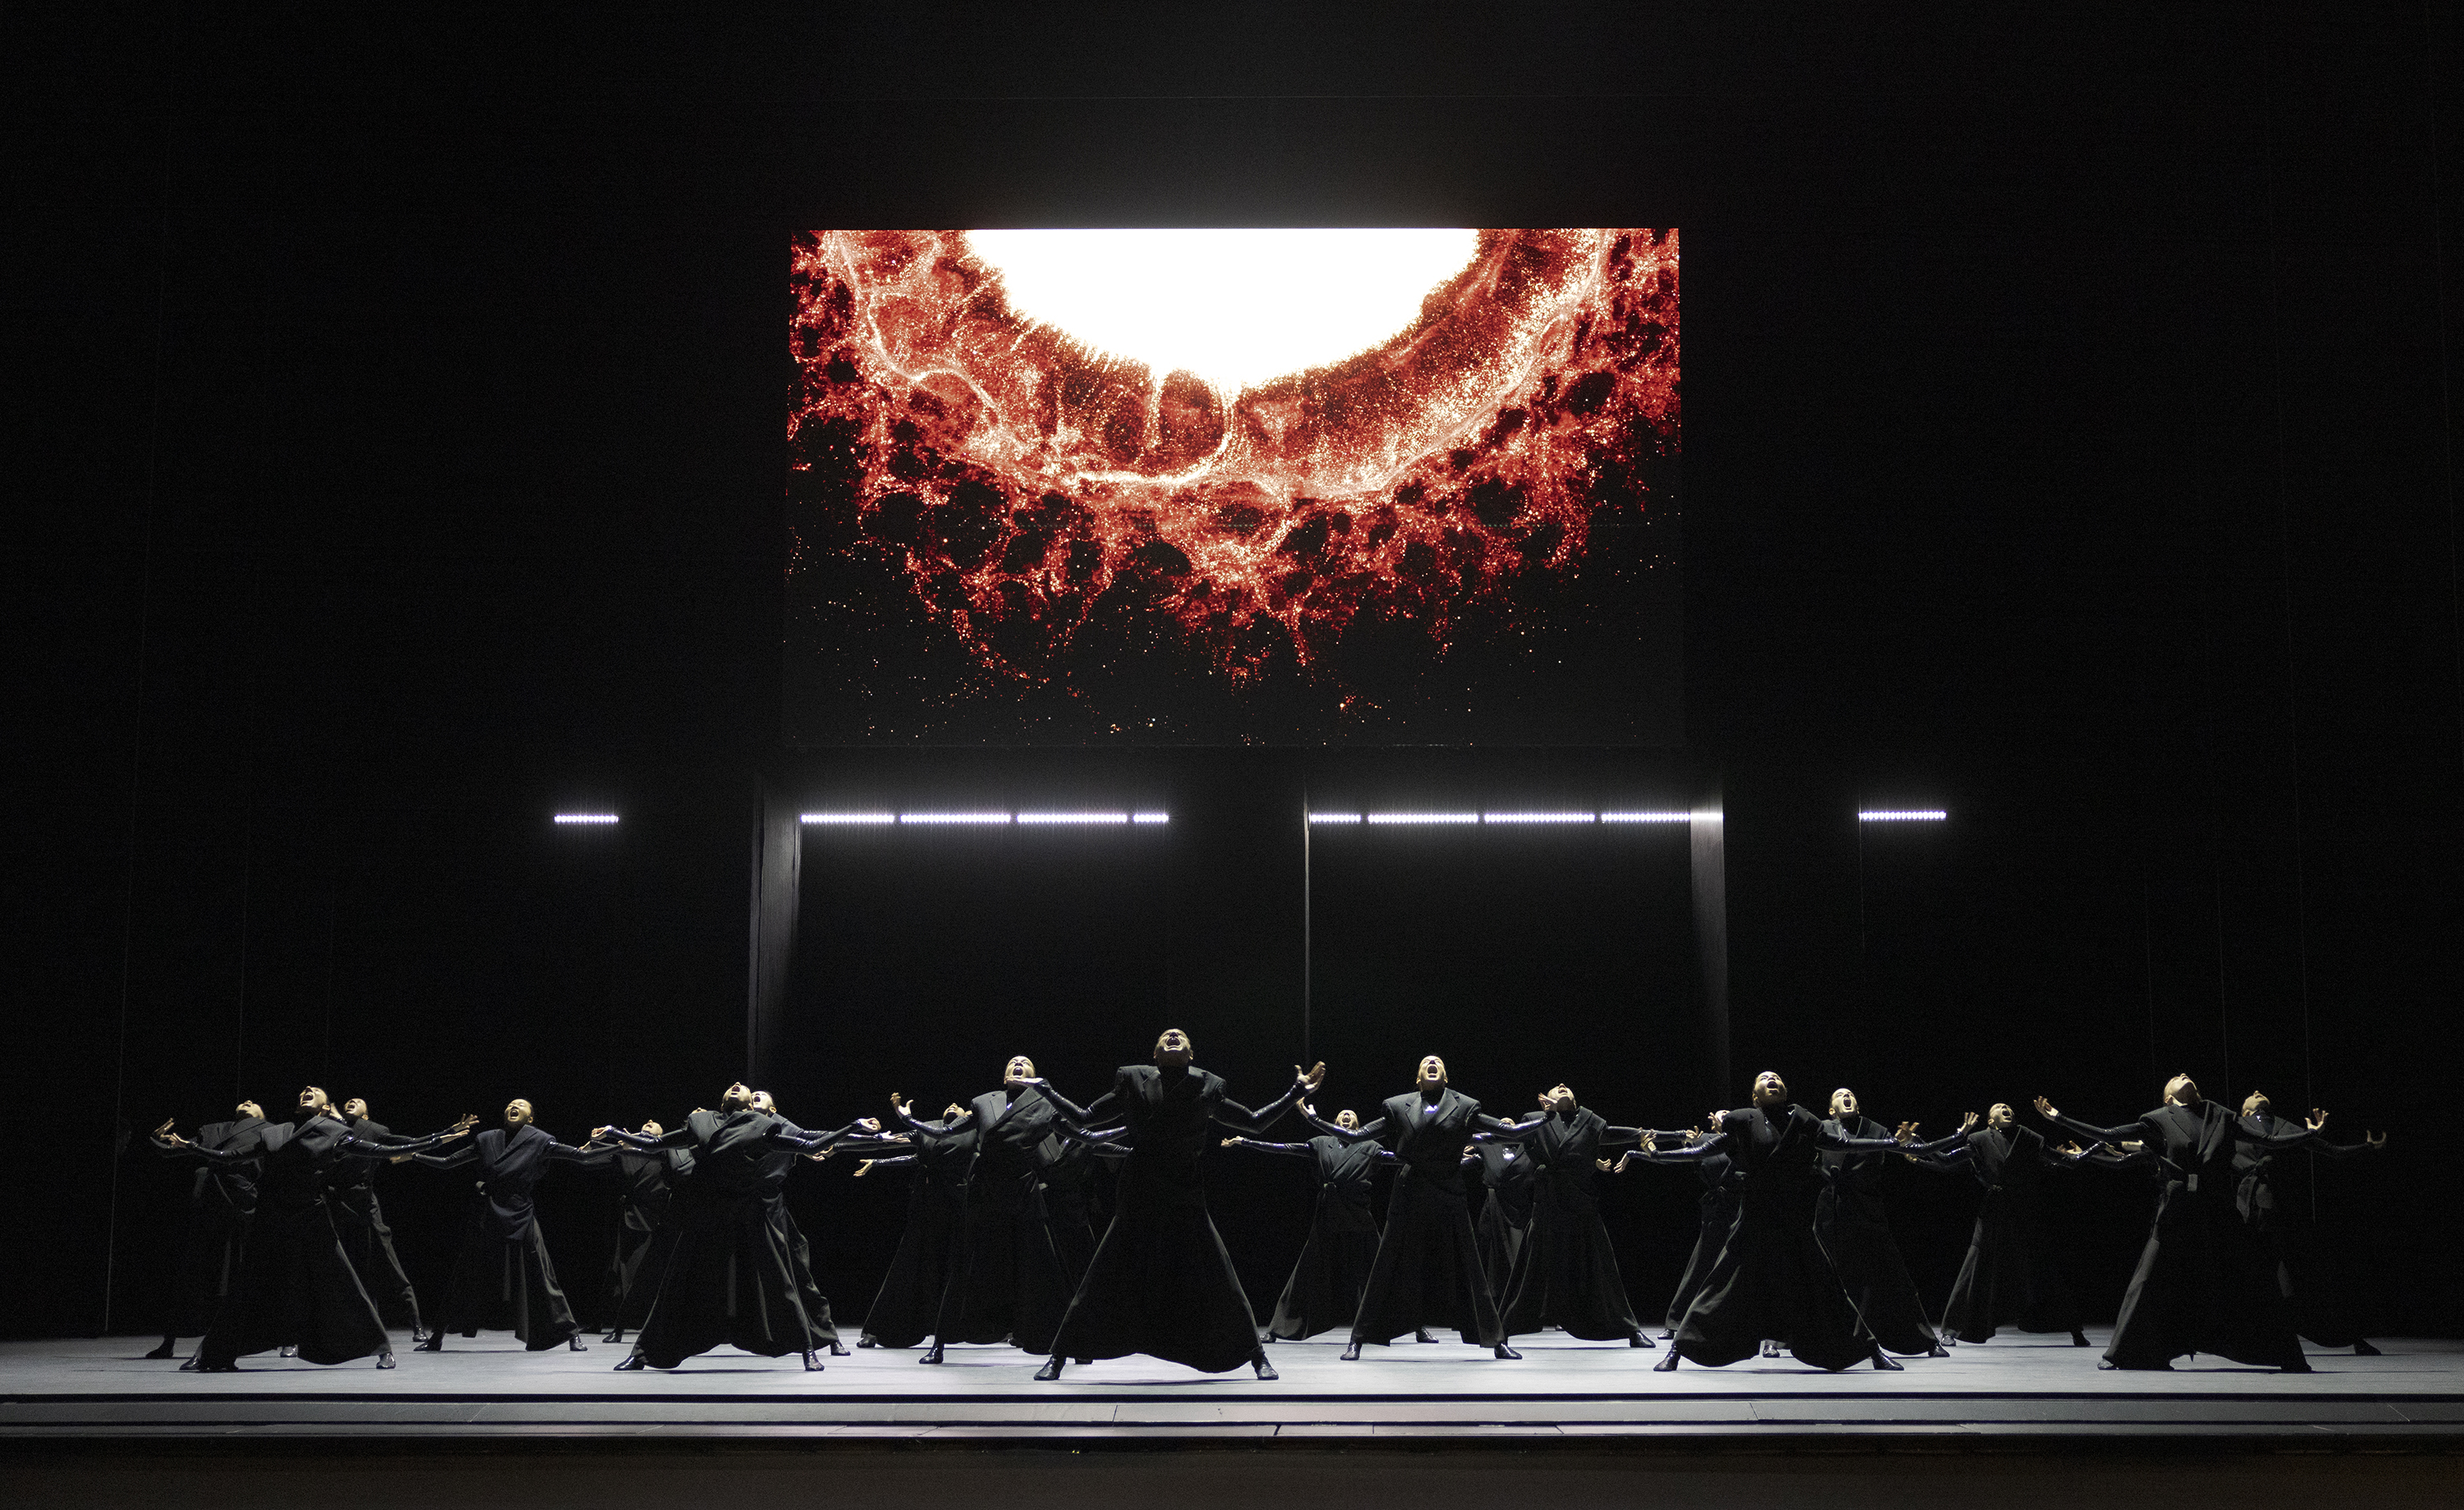 Dancers in black, outstretched, face a giant screen displaying a fiery cosmic image, all on a minimalist stage.